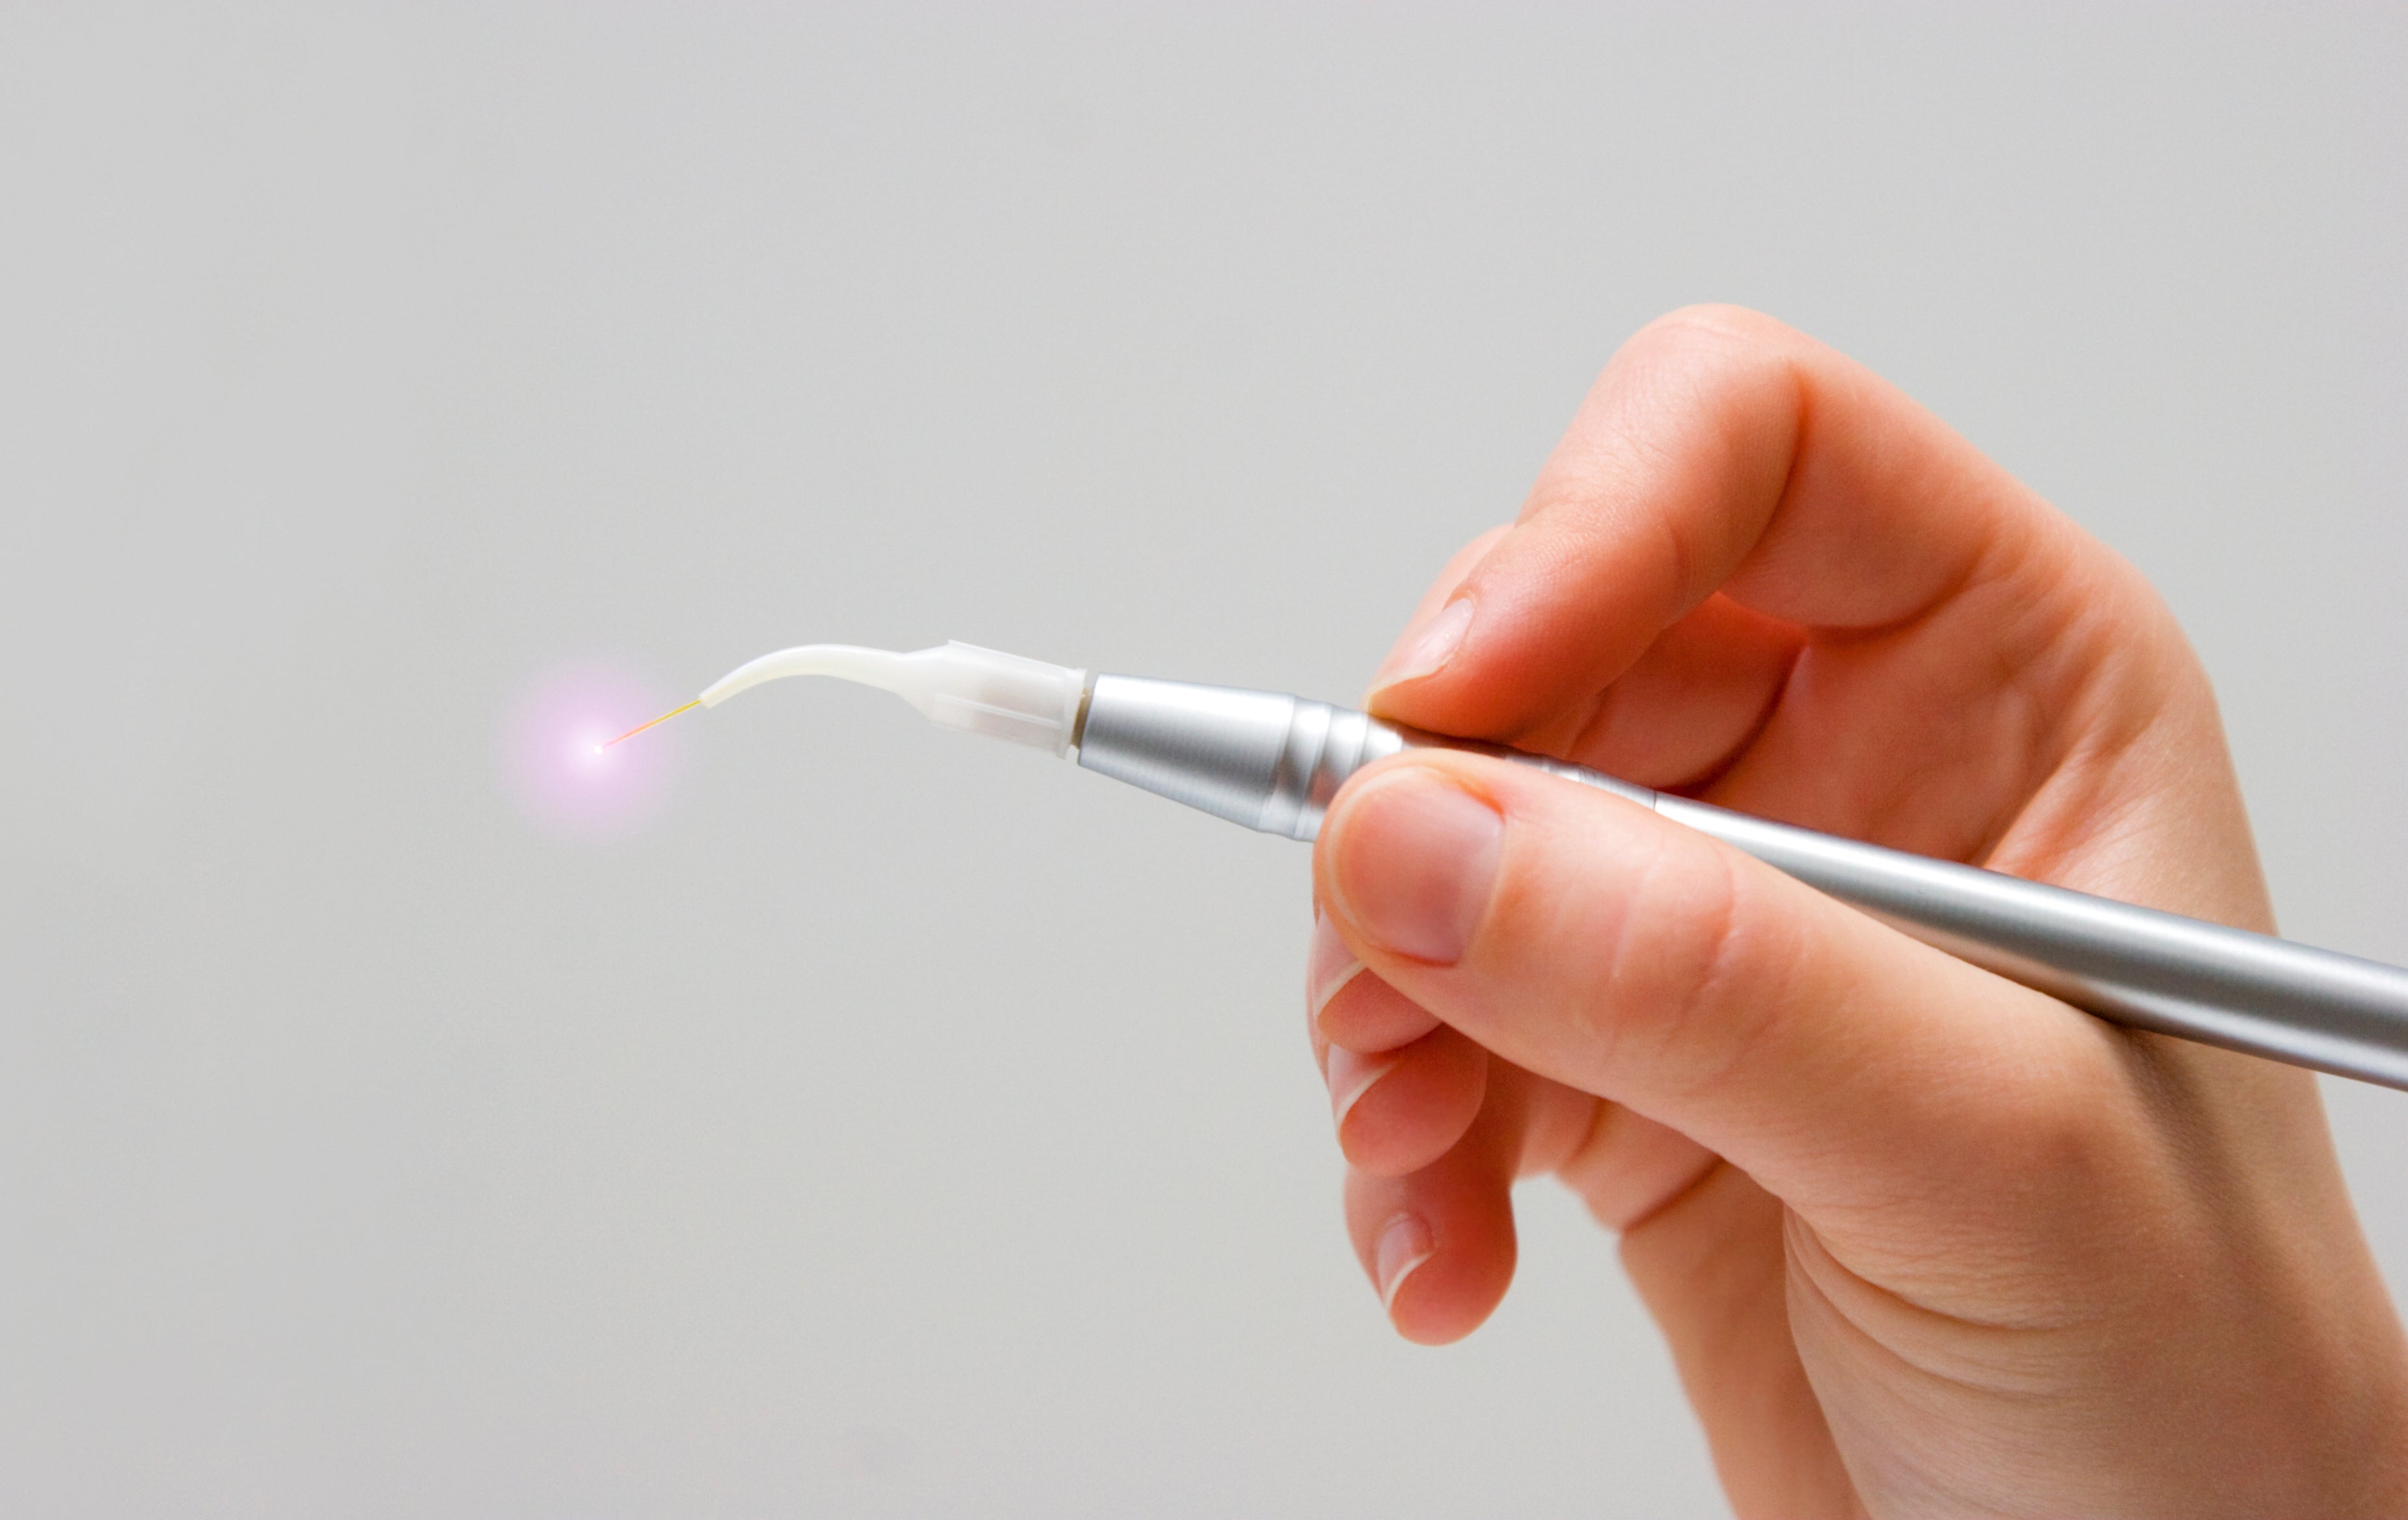 Implant Recovery with Soft-Tissue Lasers